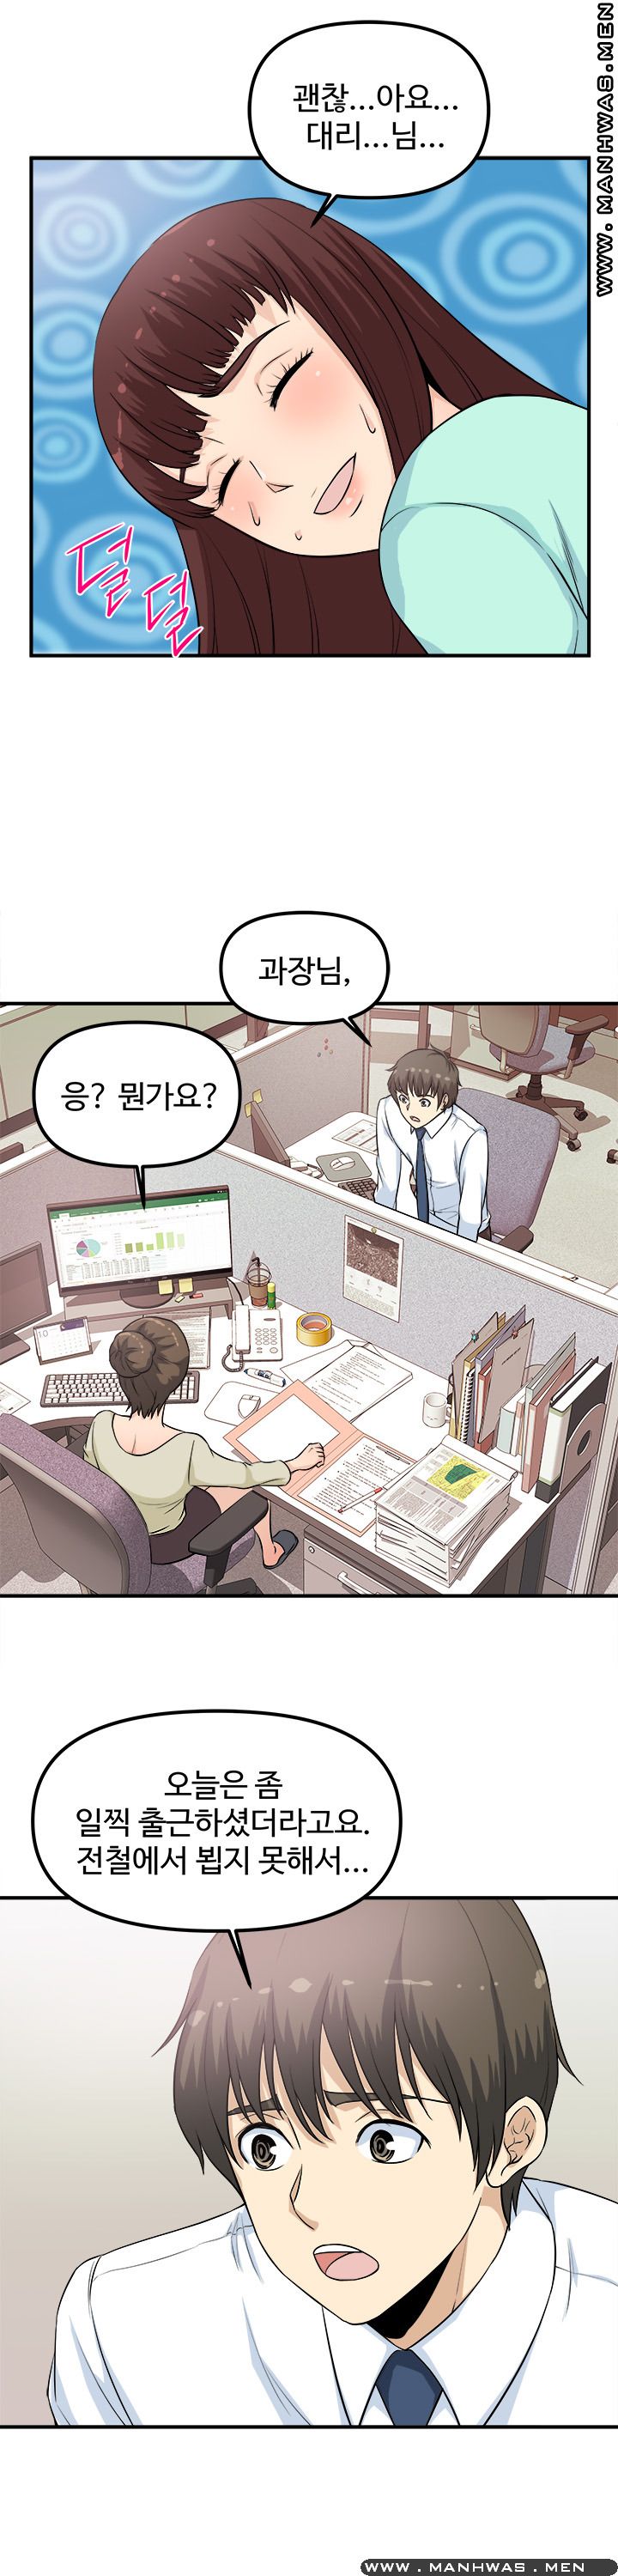 Office Bible Raw - Chapter 5 Page 21